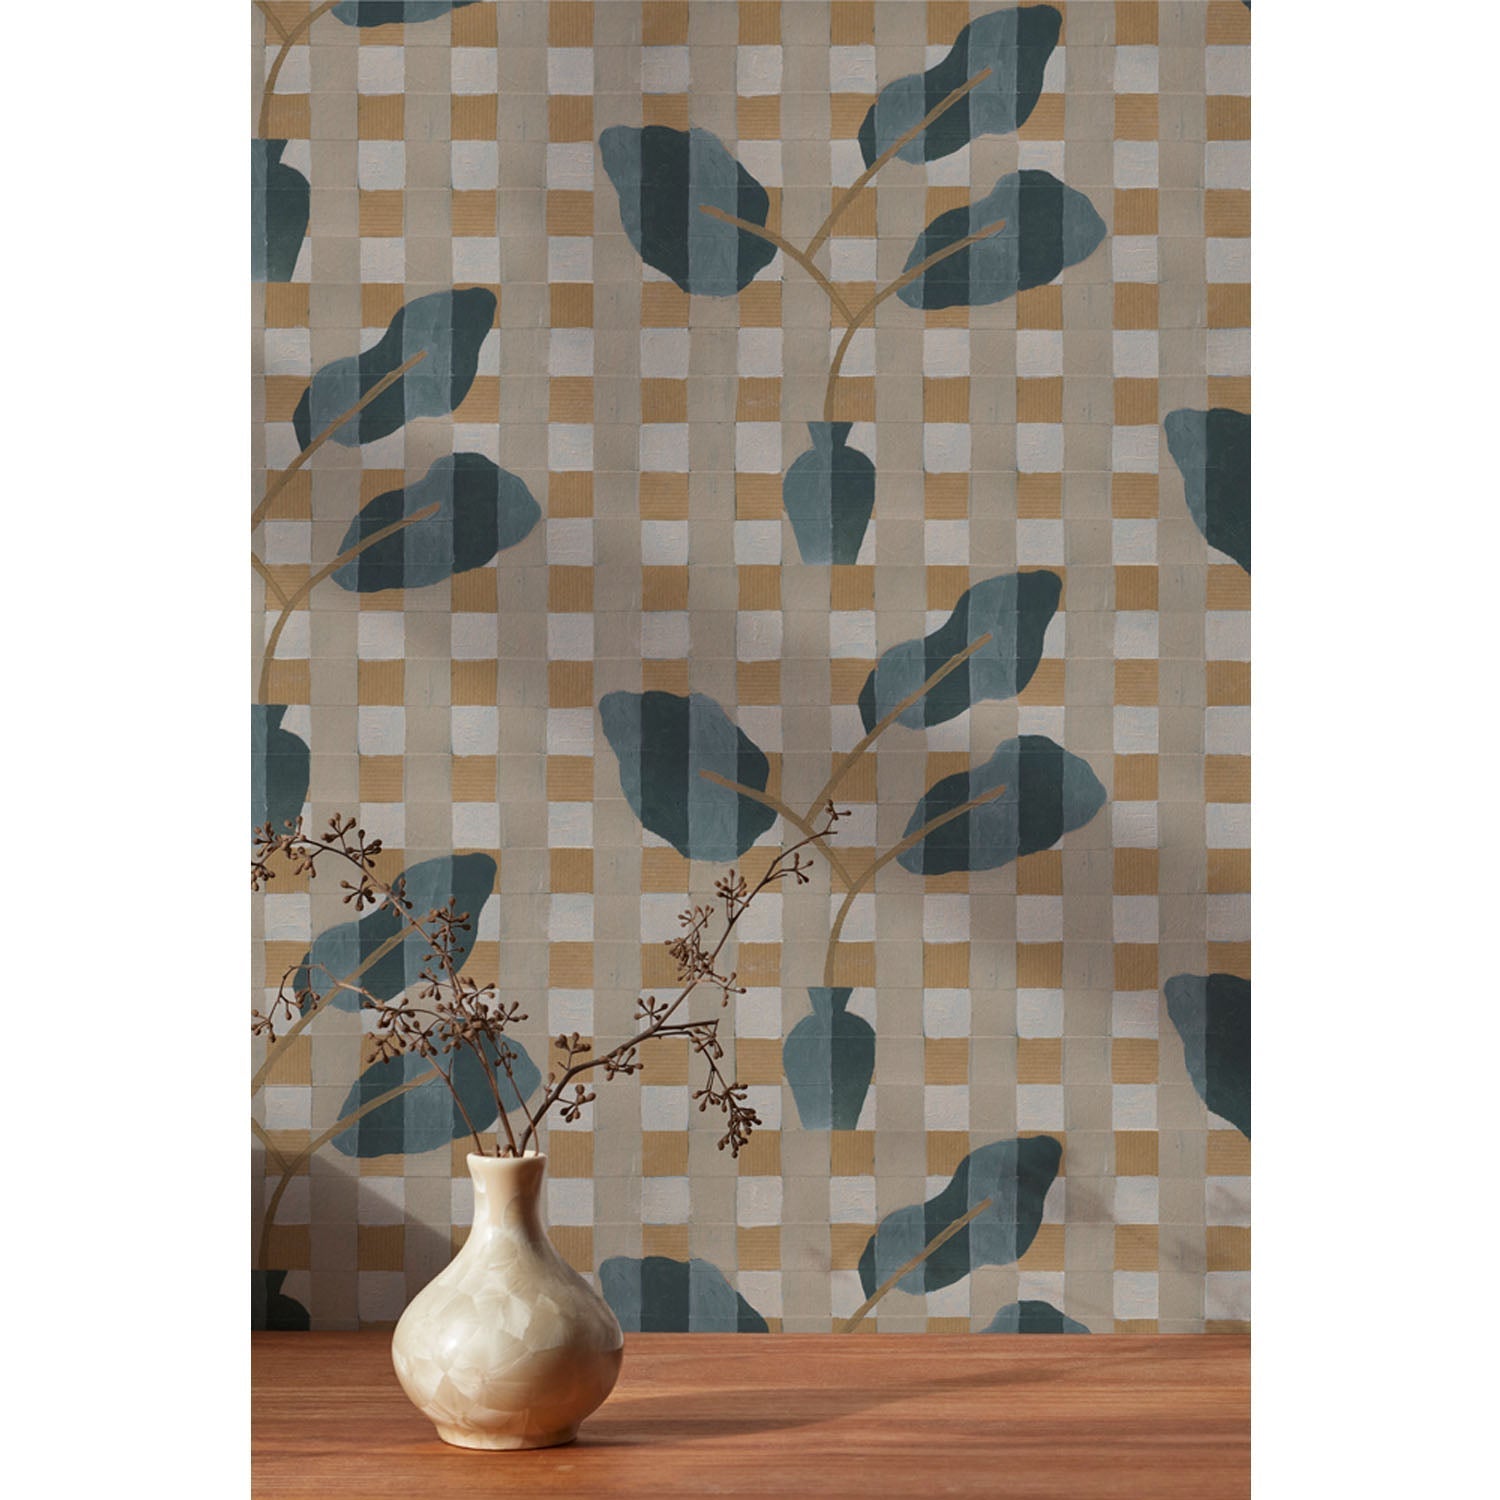 A small dried floral branch in an off white vase against a wallpaper with a complex chambray and petrol blue floral motif overlayed a white and tan plaid pattern, hover